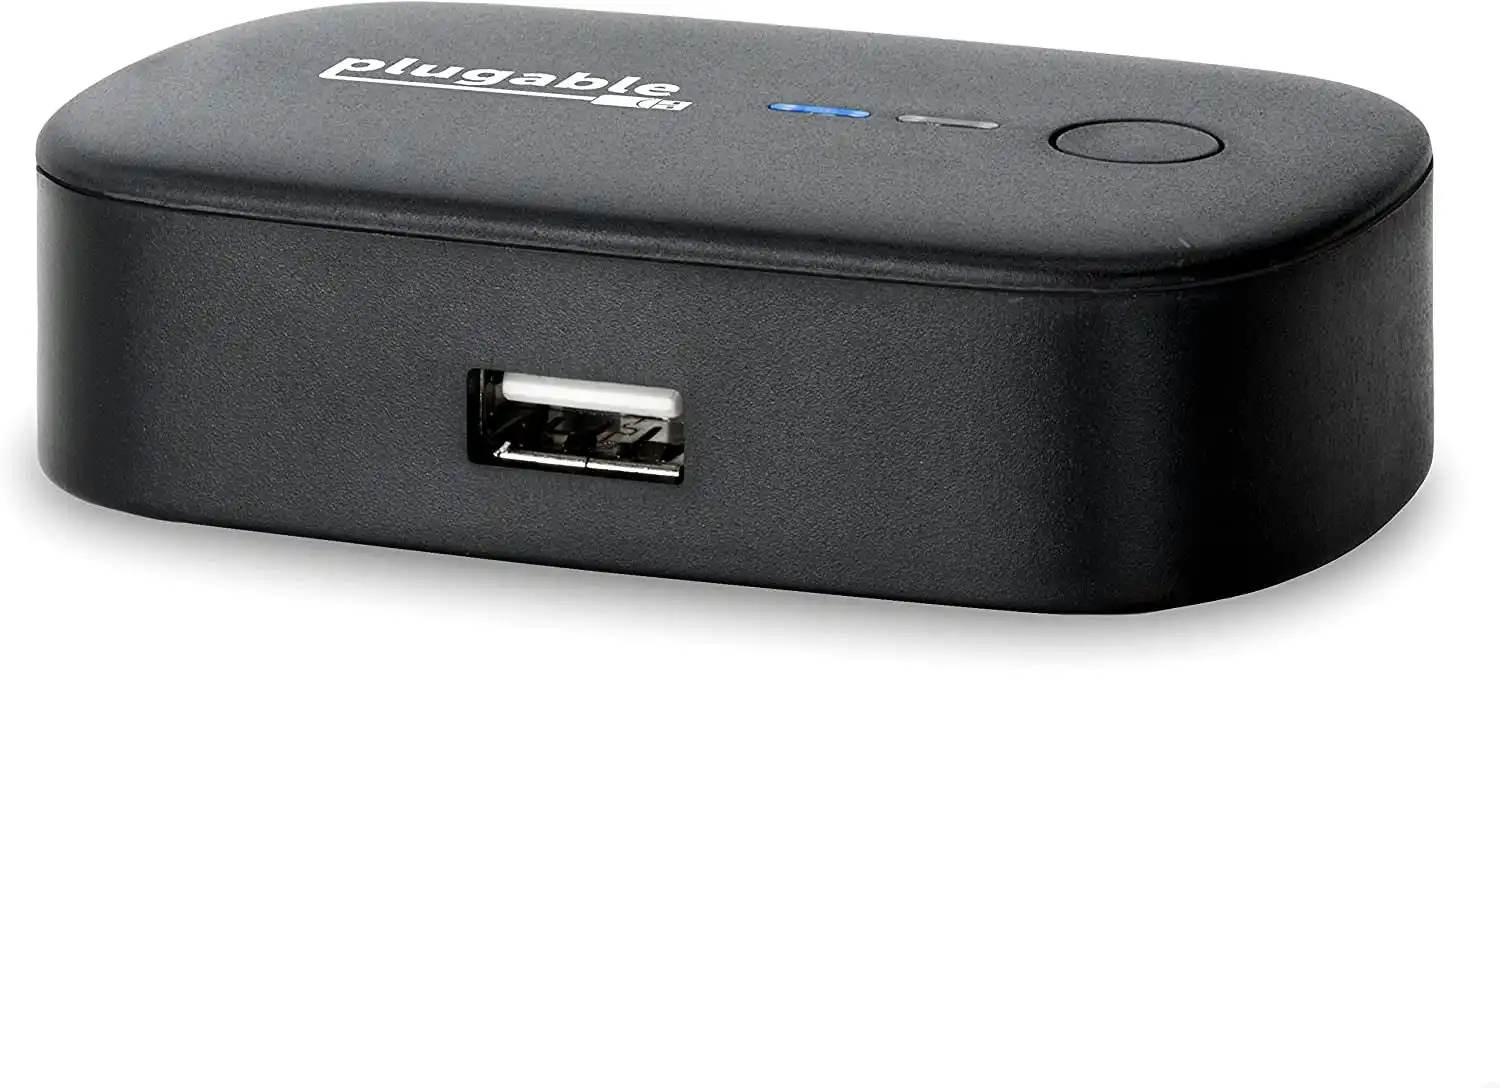 Plugable USB 2.0 Switch for One-Button USB Device Port Sharing between Two Computers (AB Switch)